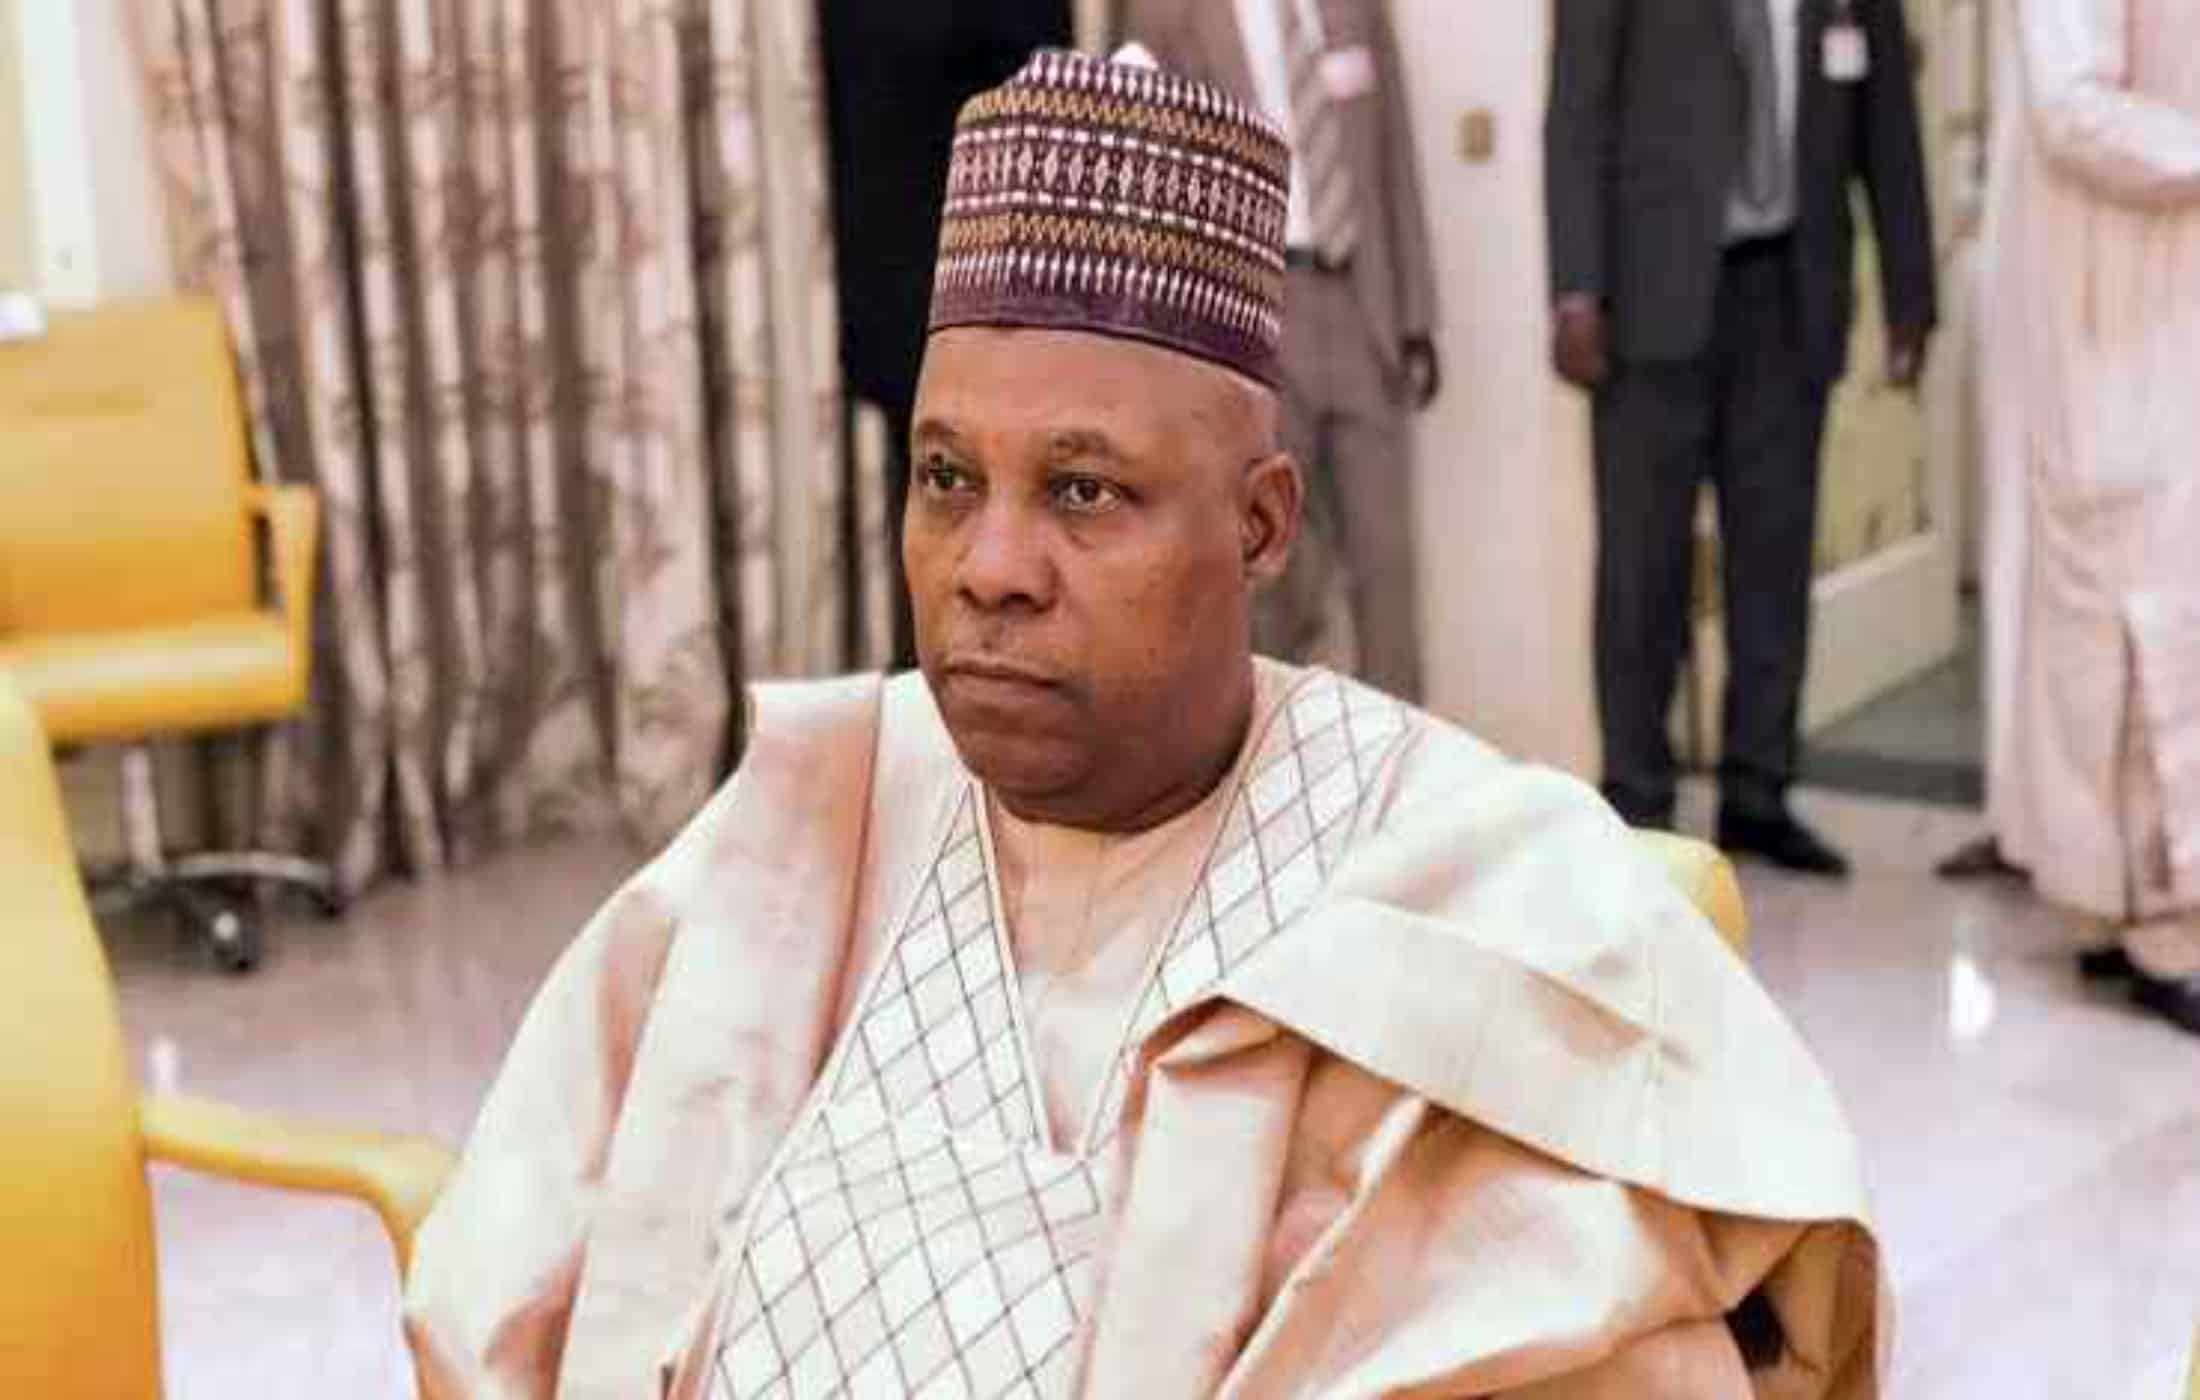 Nigerians should express their feelings over hardship in a responsible and mature manner - Shettima